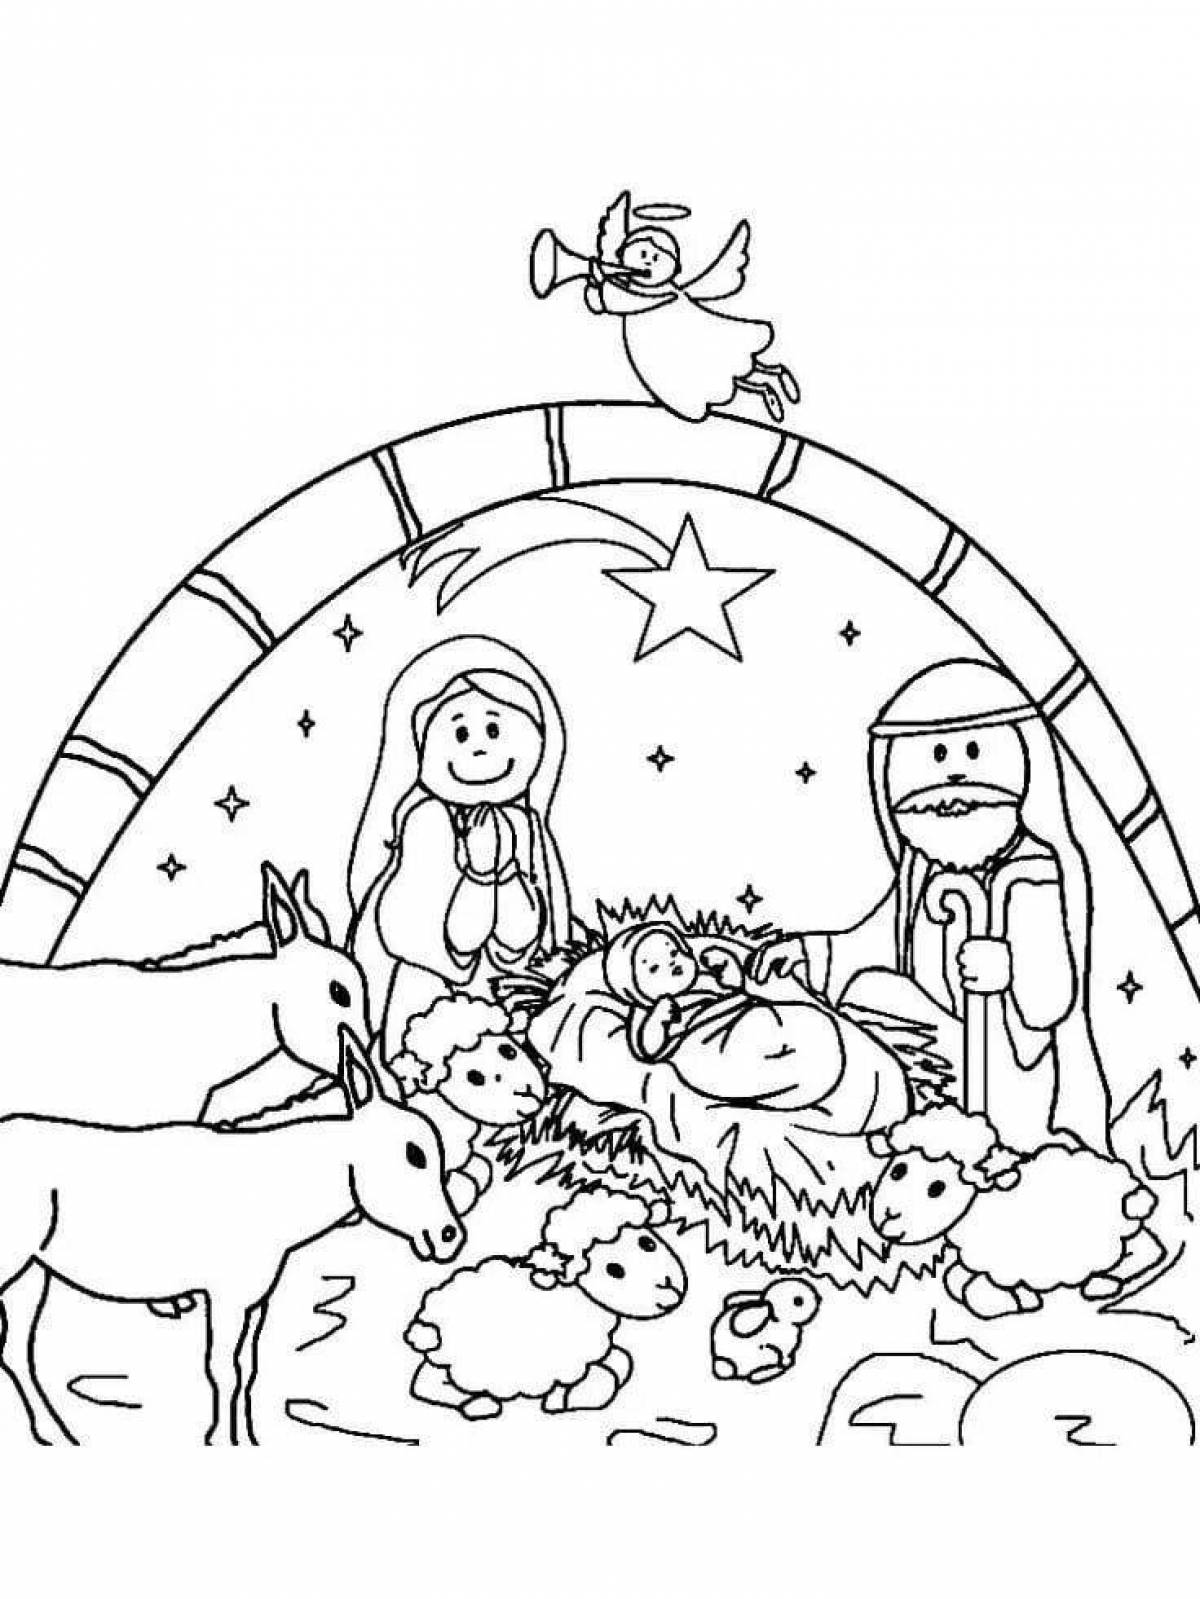 Bright Christmas coloring book for kids